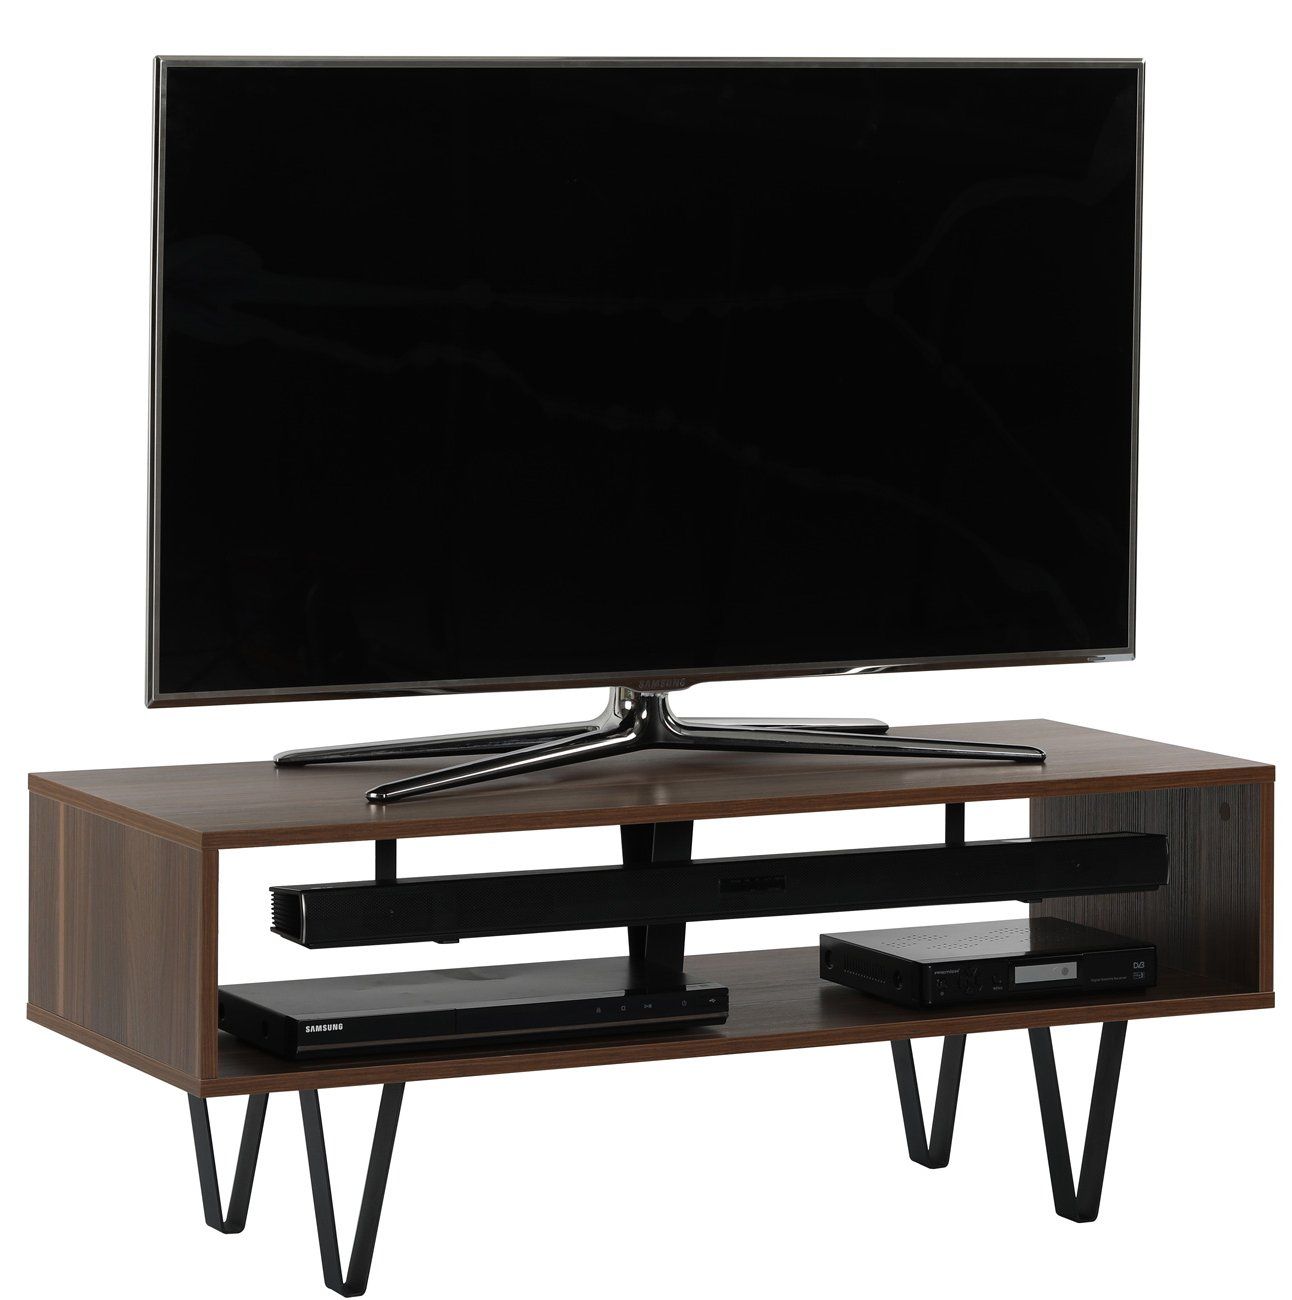 Off The Wall Chevron 1100 Walnut Tv Stand For Tvs Up To 50" Pertaining To Off Wall Tv Stands (View 14 of 15)